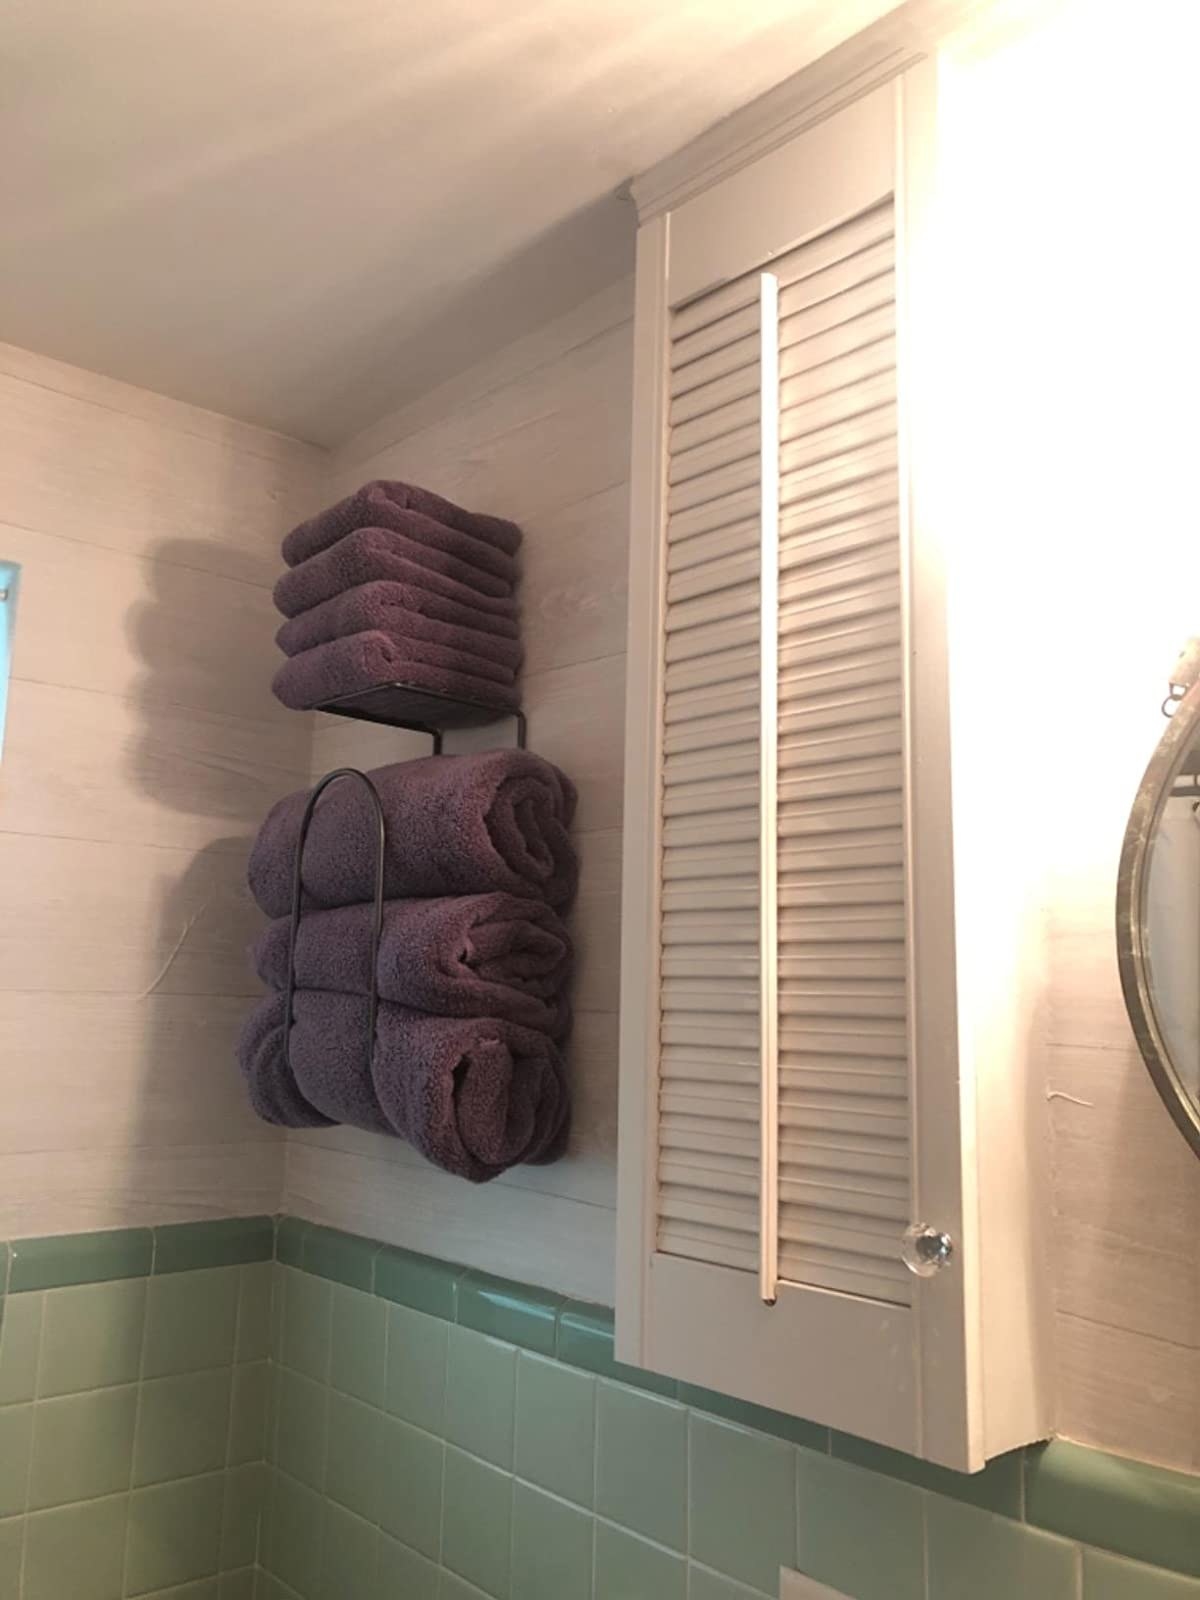 The purple towels hanging in a bathroom